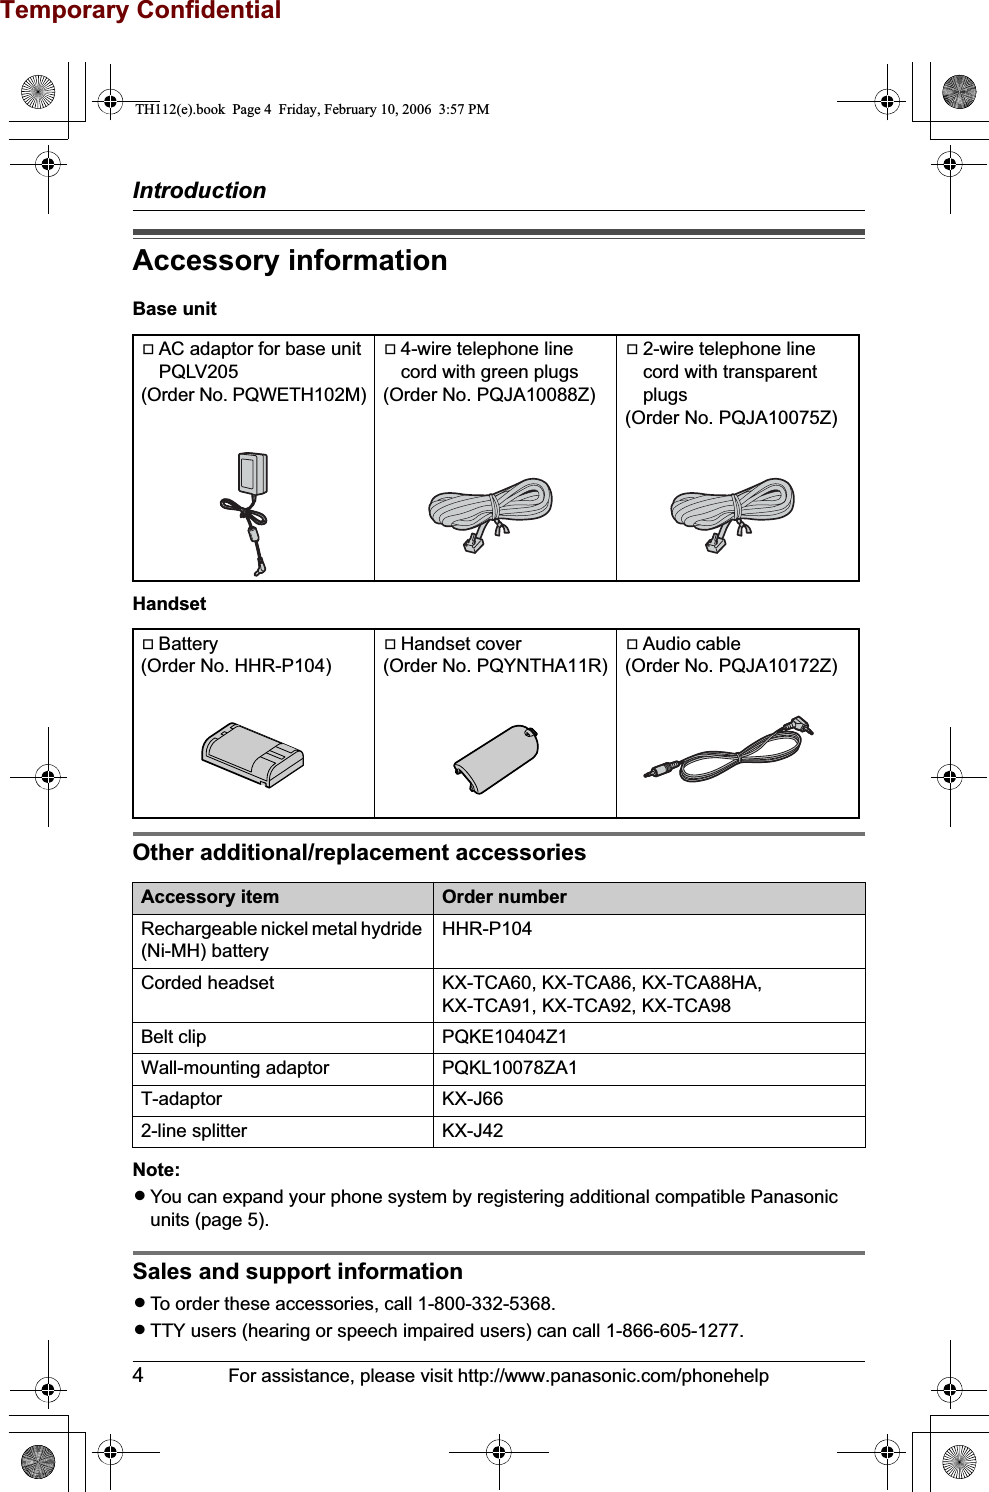 Temporary ConfidentialIntroduction4For assistance, please visit http://www.panasonic.com/phonehelpAccessory informationBase unitHandsetOther additional/replacement accessoriesNote:LYou can expand your phone system by registering additional compatible Panasonic units (page 5).Sales and support informationLTo order these accessories, call 1-800-332-5368.LTTY users (hearing or speech impaired users) can call 1-866-605-1277.AAC adaptor for base unit PQLV205 (Order No. PQWETH102M)A4-wire telephone line cord with green plugs(Order No. PQJA10088Z)A2-wire telephone line cord with transparent plugs(Order No. PQJA10075Z)ABattery(Order No. HHR-P104)AHandset cover(Order No. PQYNTHA11R)AAudio cable(Order No. PQJA10172Z)Accessory item Order numberRechargeable nickel metal hydride (Ni-MH) batteryHHR-P104Corded headset KX-TCA60, KX-TCA86, KX-TCA88HA, KX-TCA91, KX-TCA92, KX-TCA98Belt clip PQKE10404Z1Wall-mounting adaptor PQKL10078ZA1T-adaptor KX-J662-line splitter KX-J42TH112(e).book  Page 4  Friday, February 10, 2006  3:57 PM